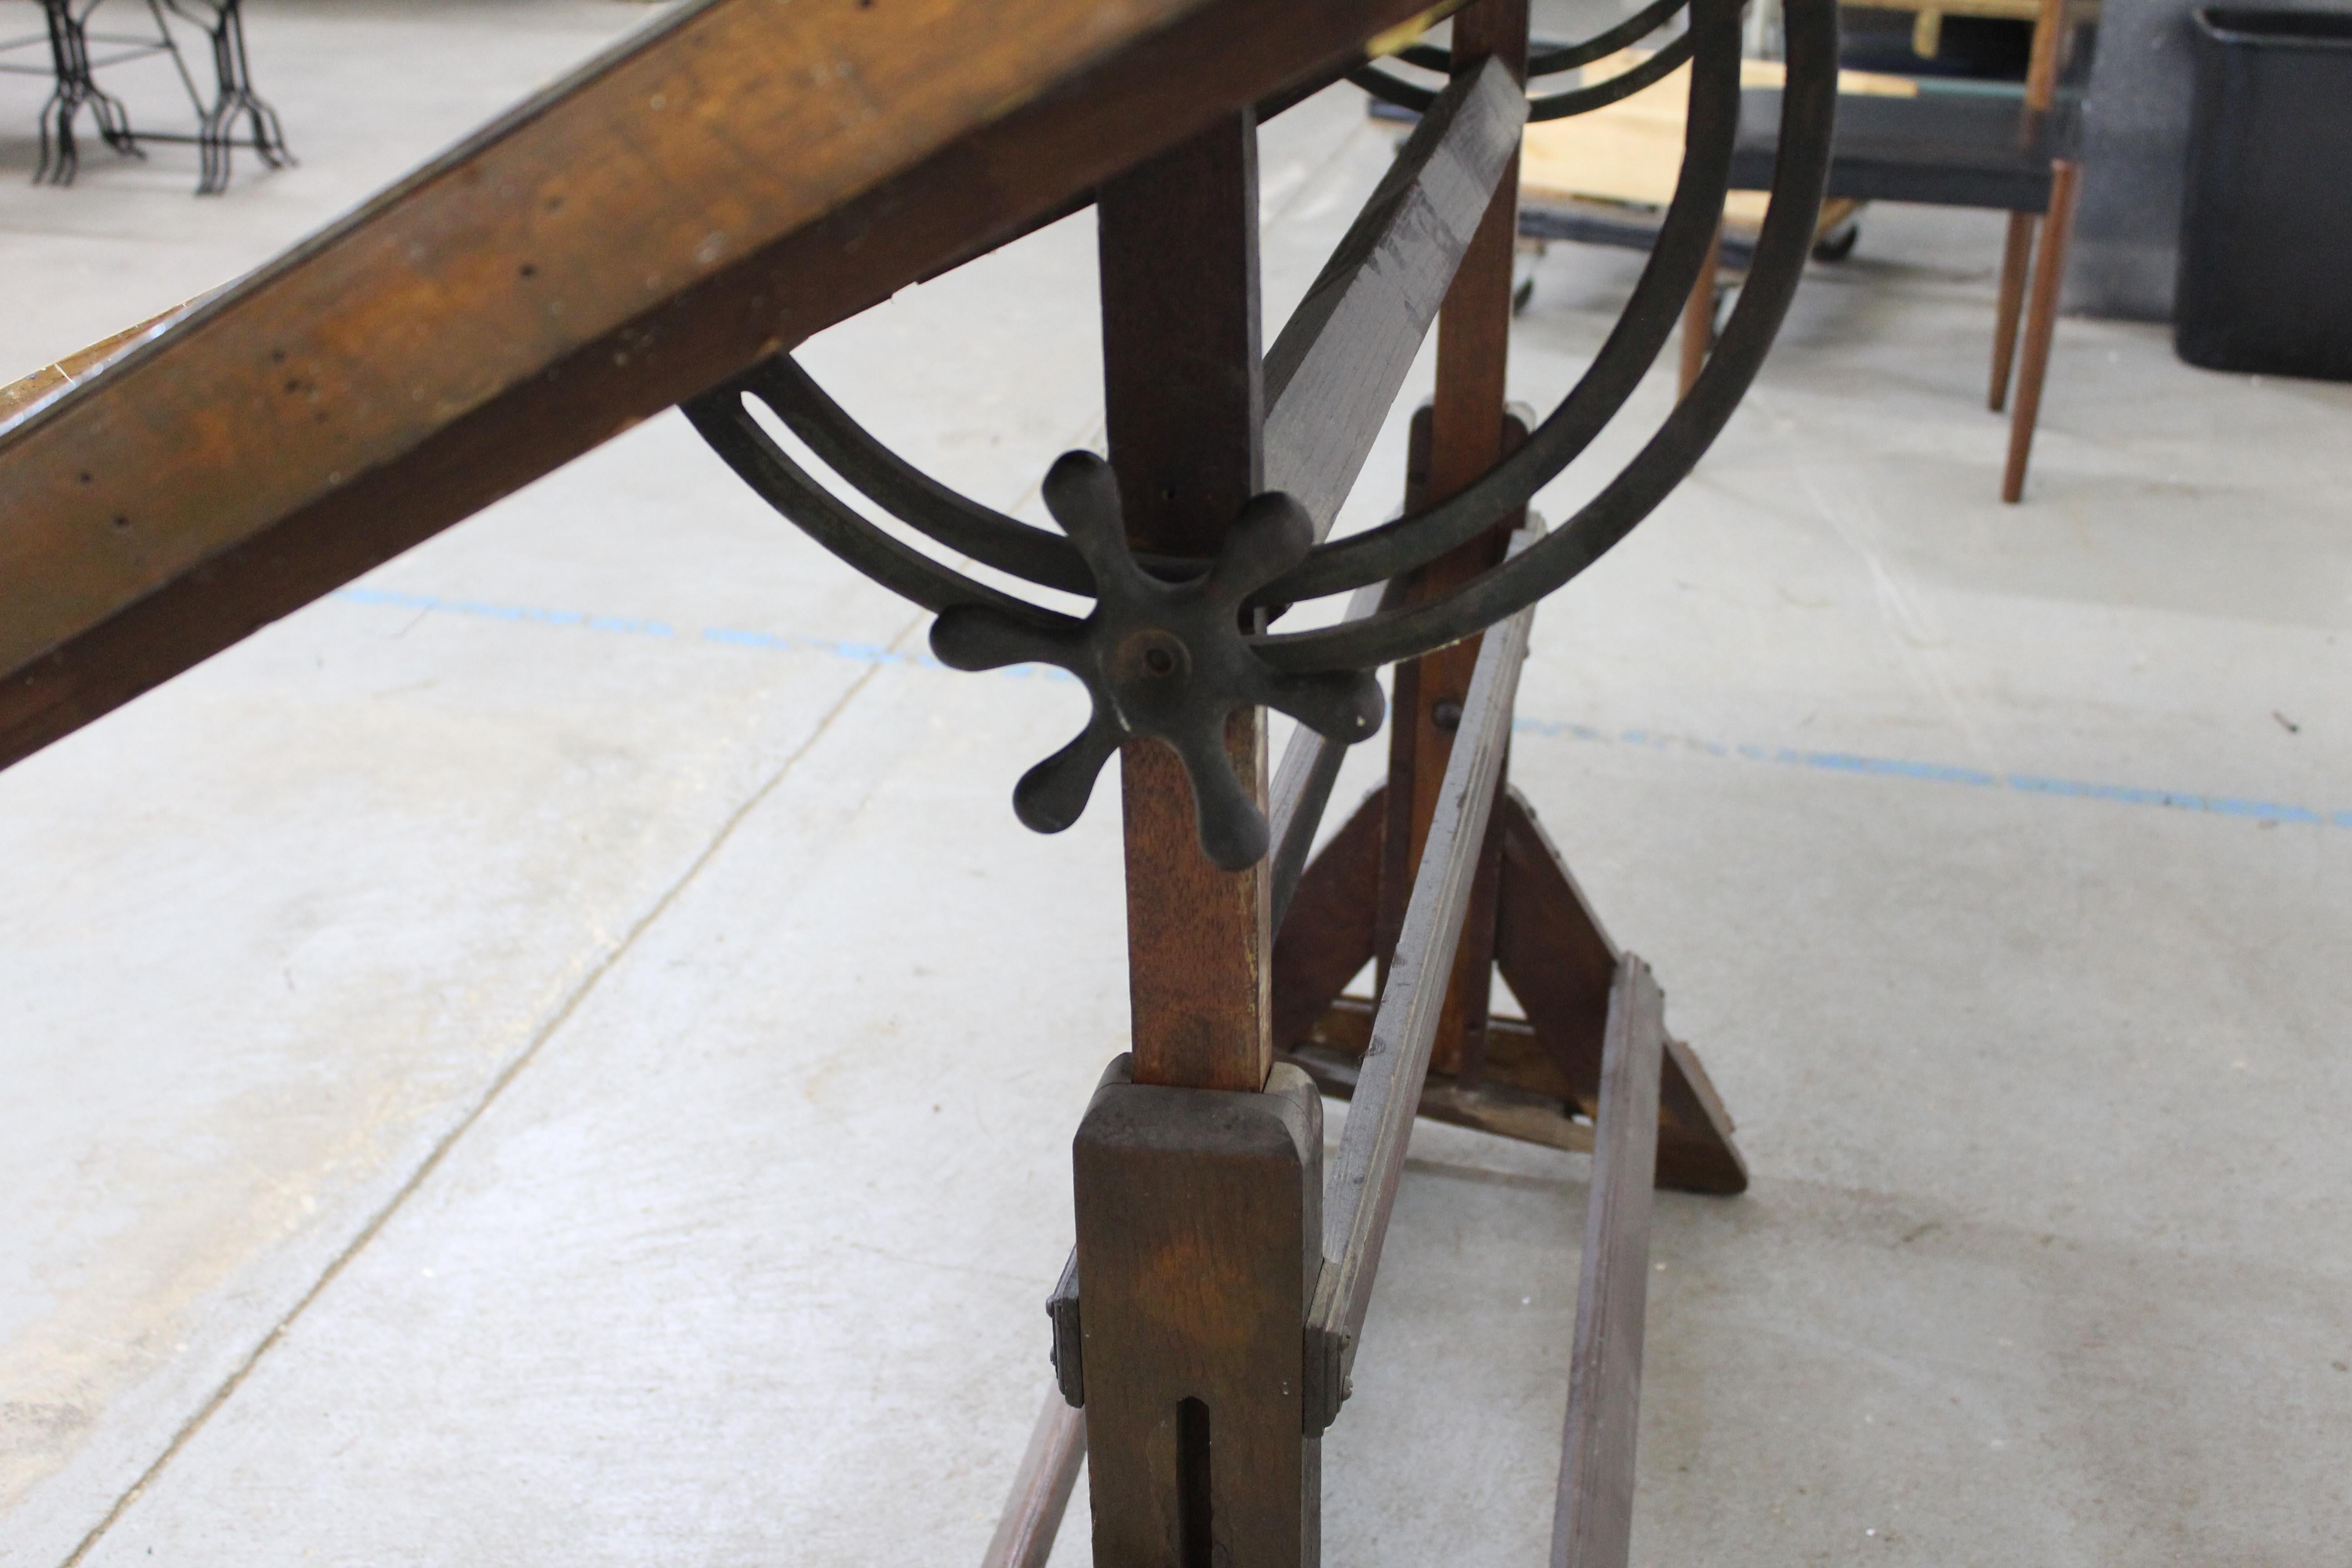 Driftwood Antique Industrial Drafting Table